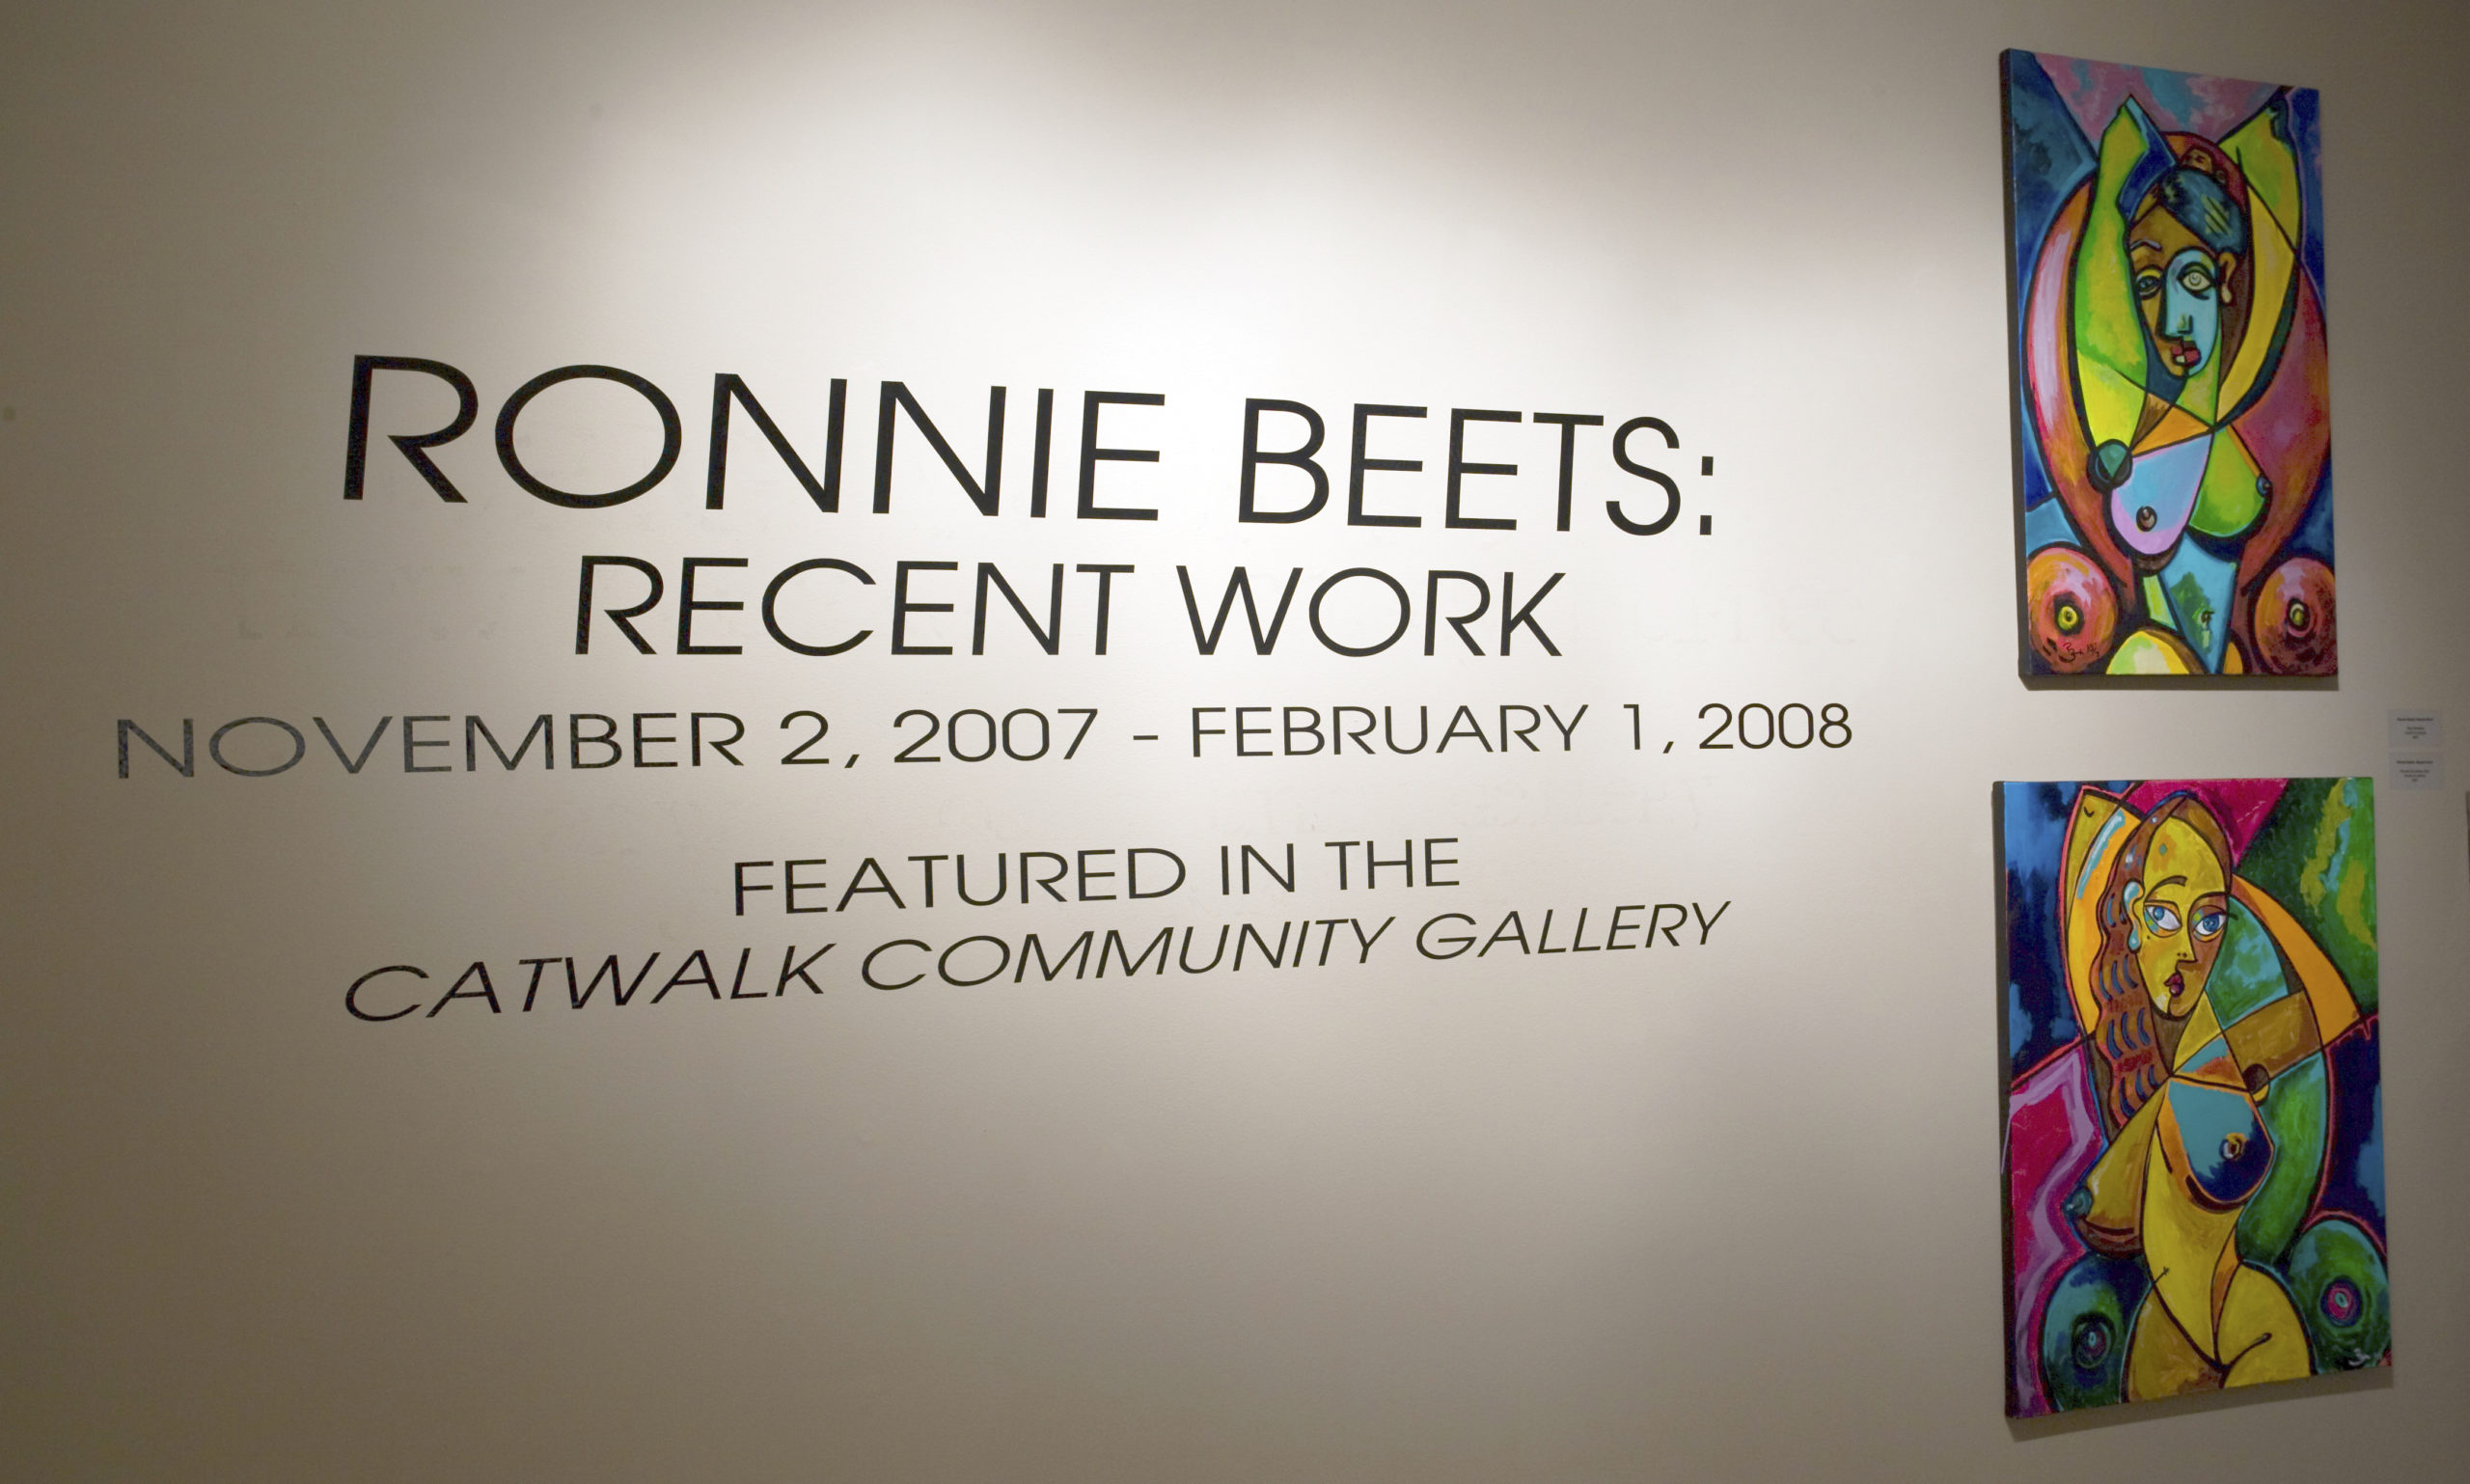 Ronnie Beets: Recent Work